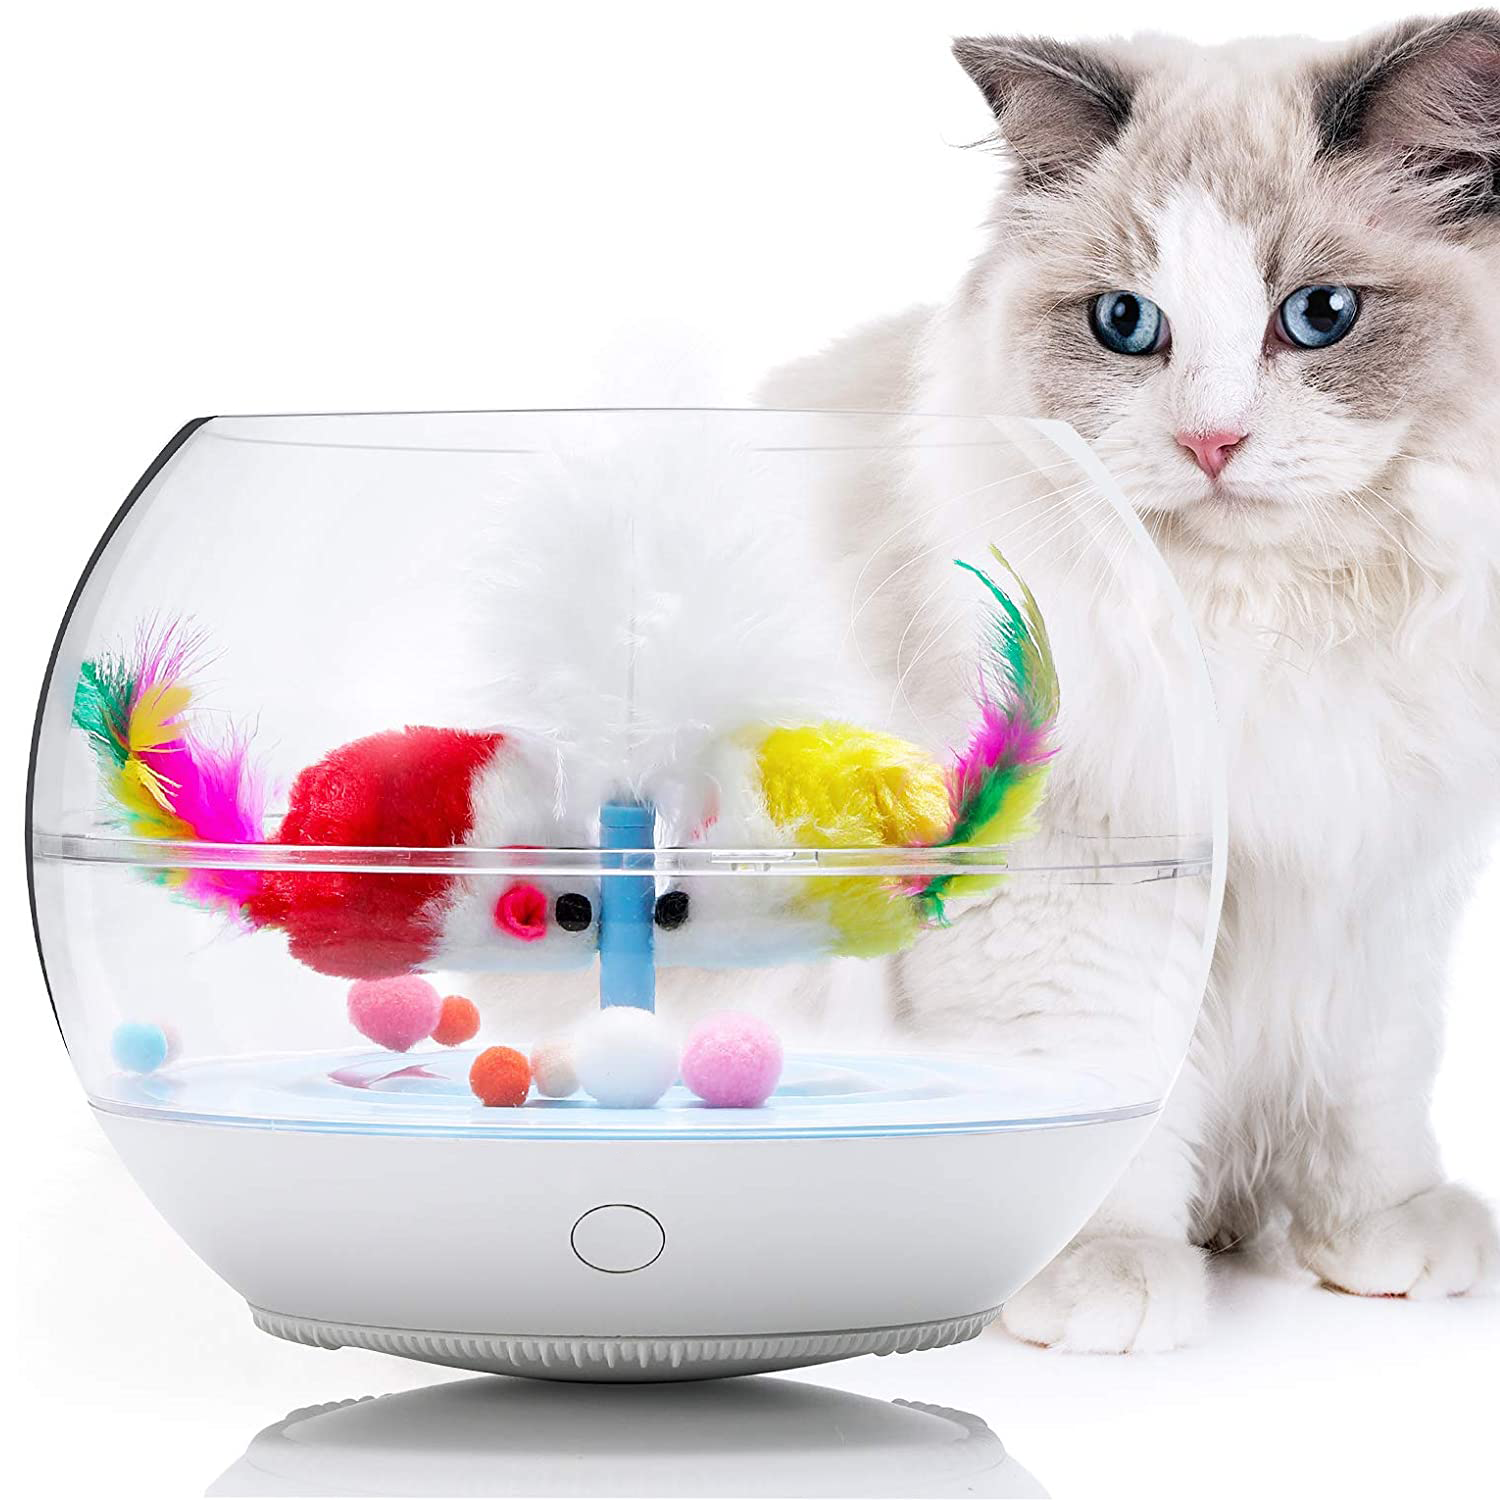 Dancing Fish Toy for Indoor Cats & Small Dogs – Motion Sensor Cat